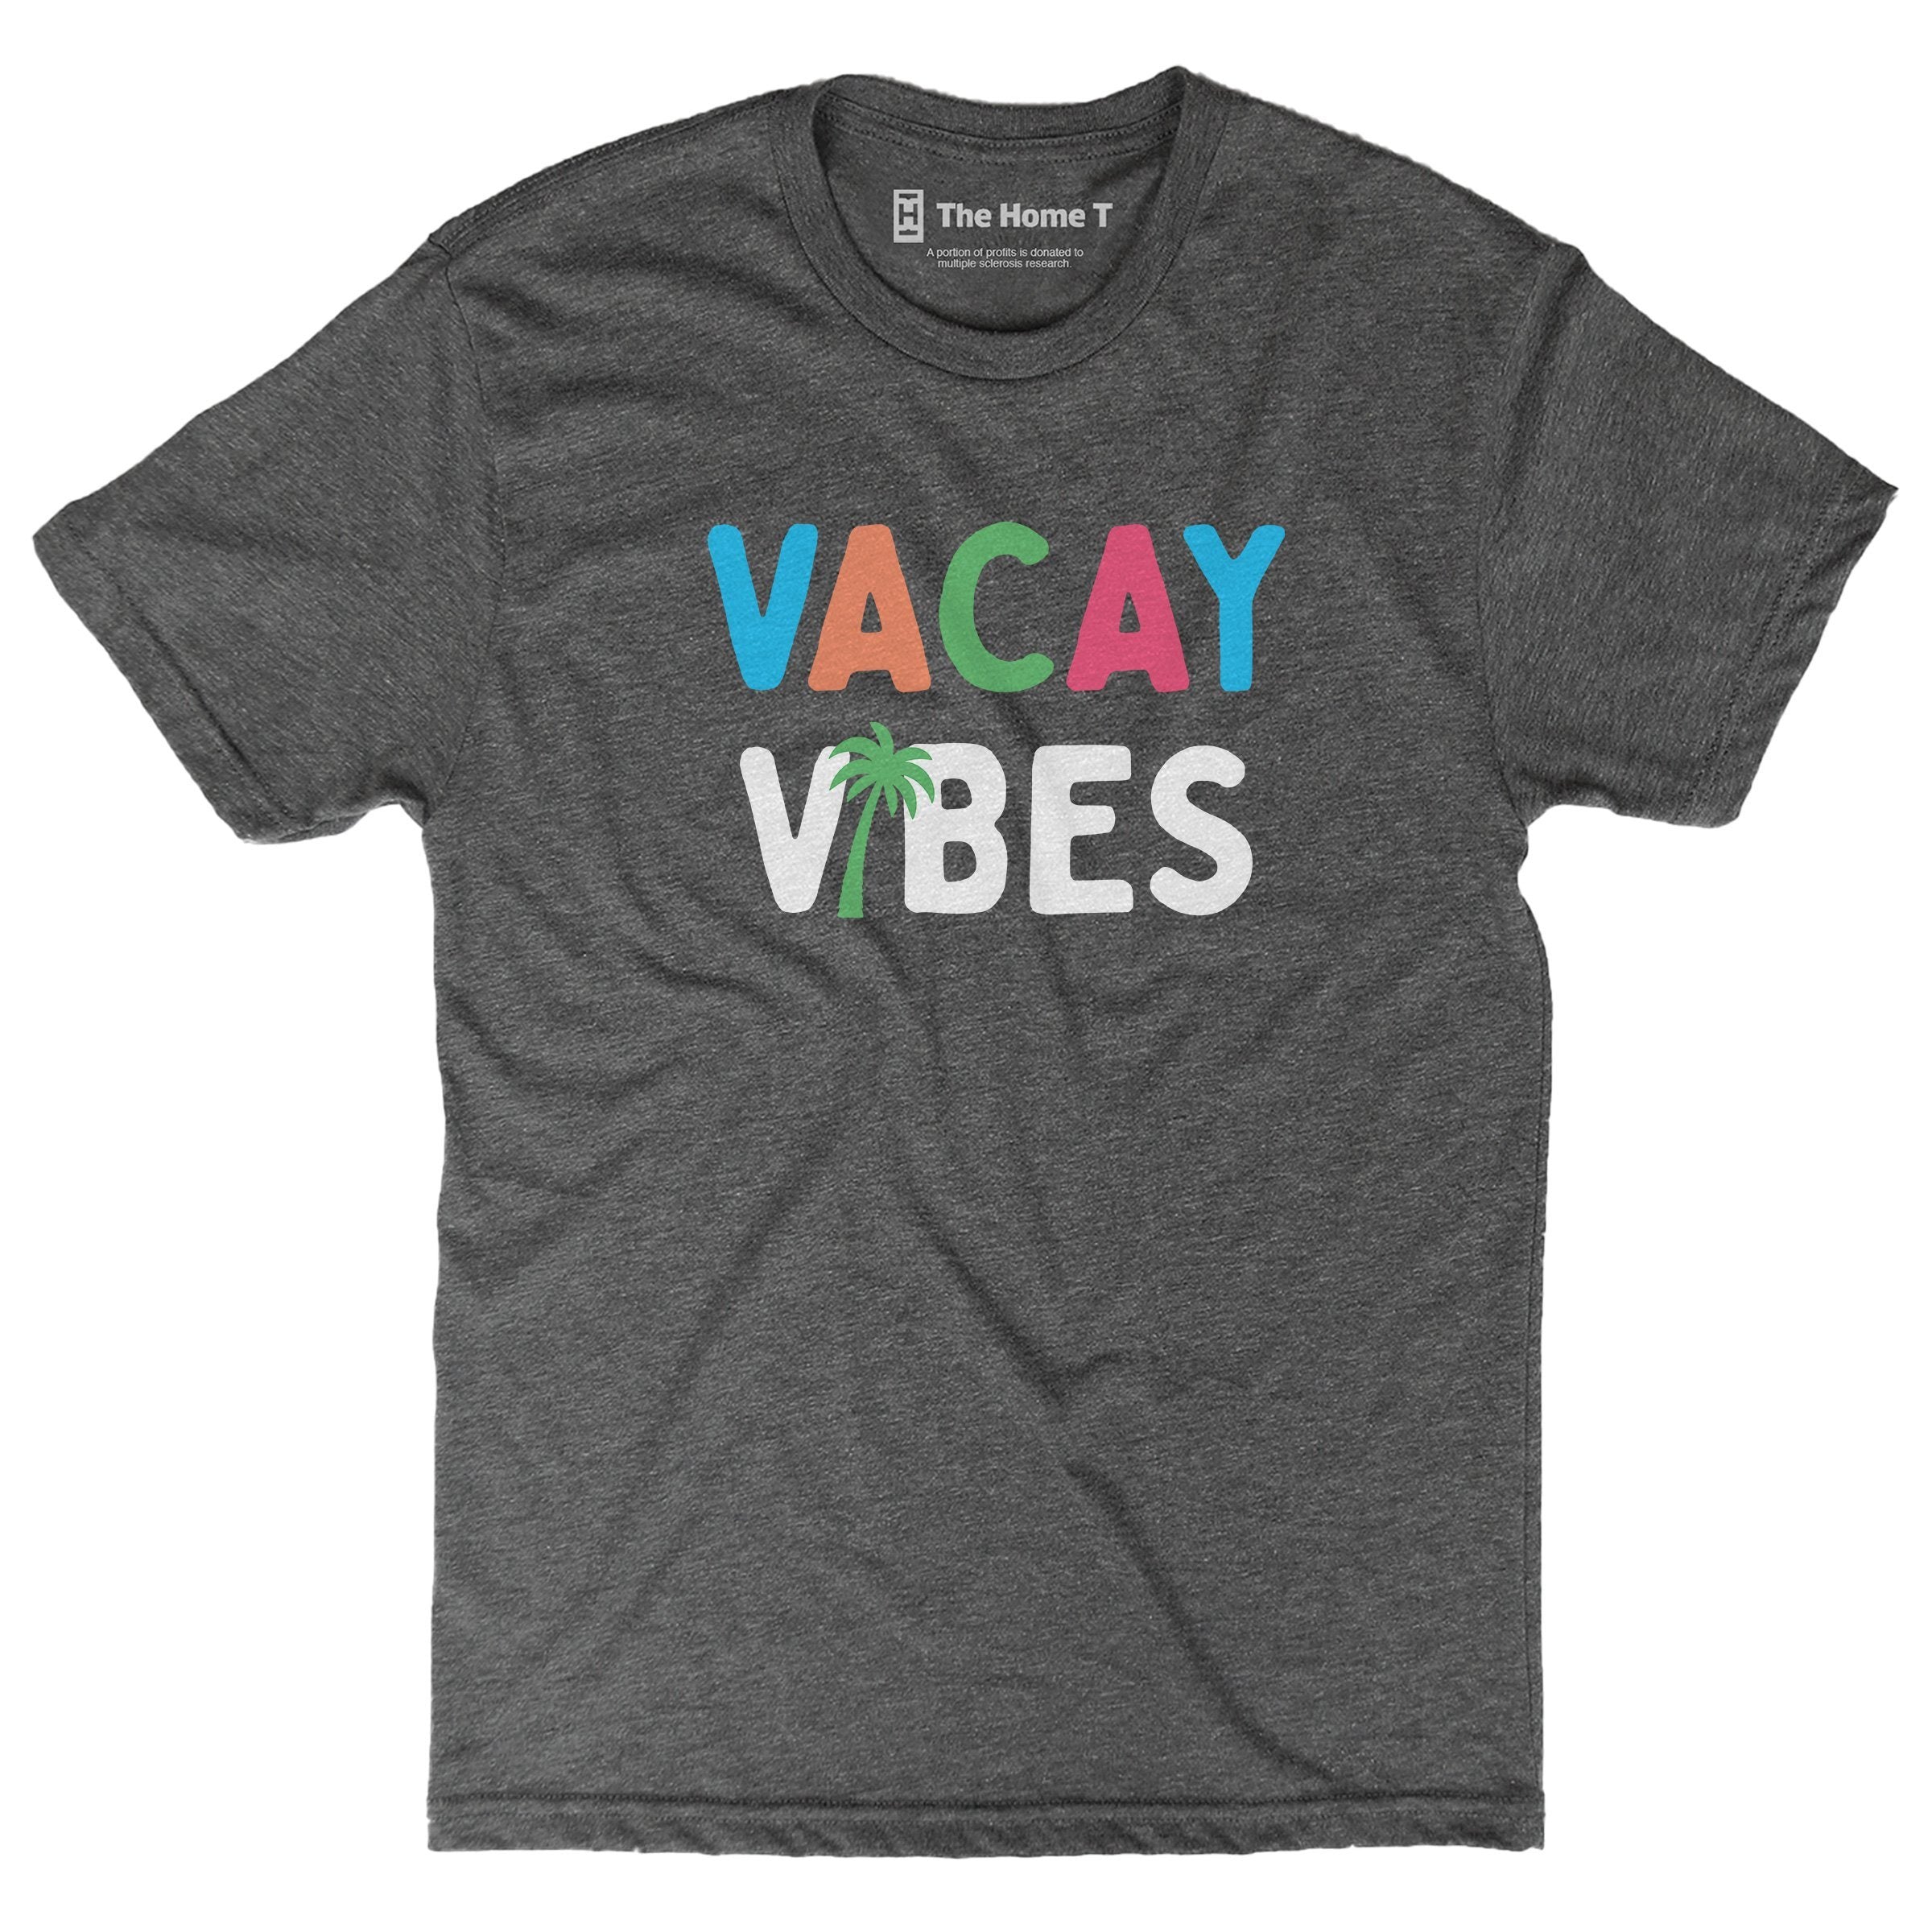 Vacay Vibes The Home T XS Crew Neck